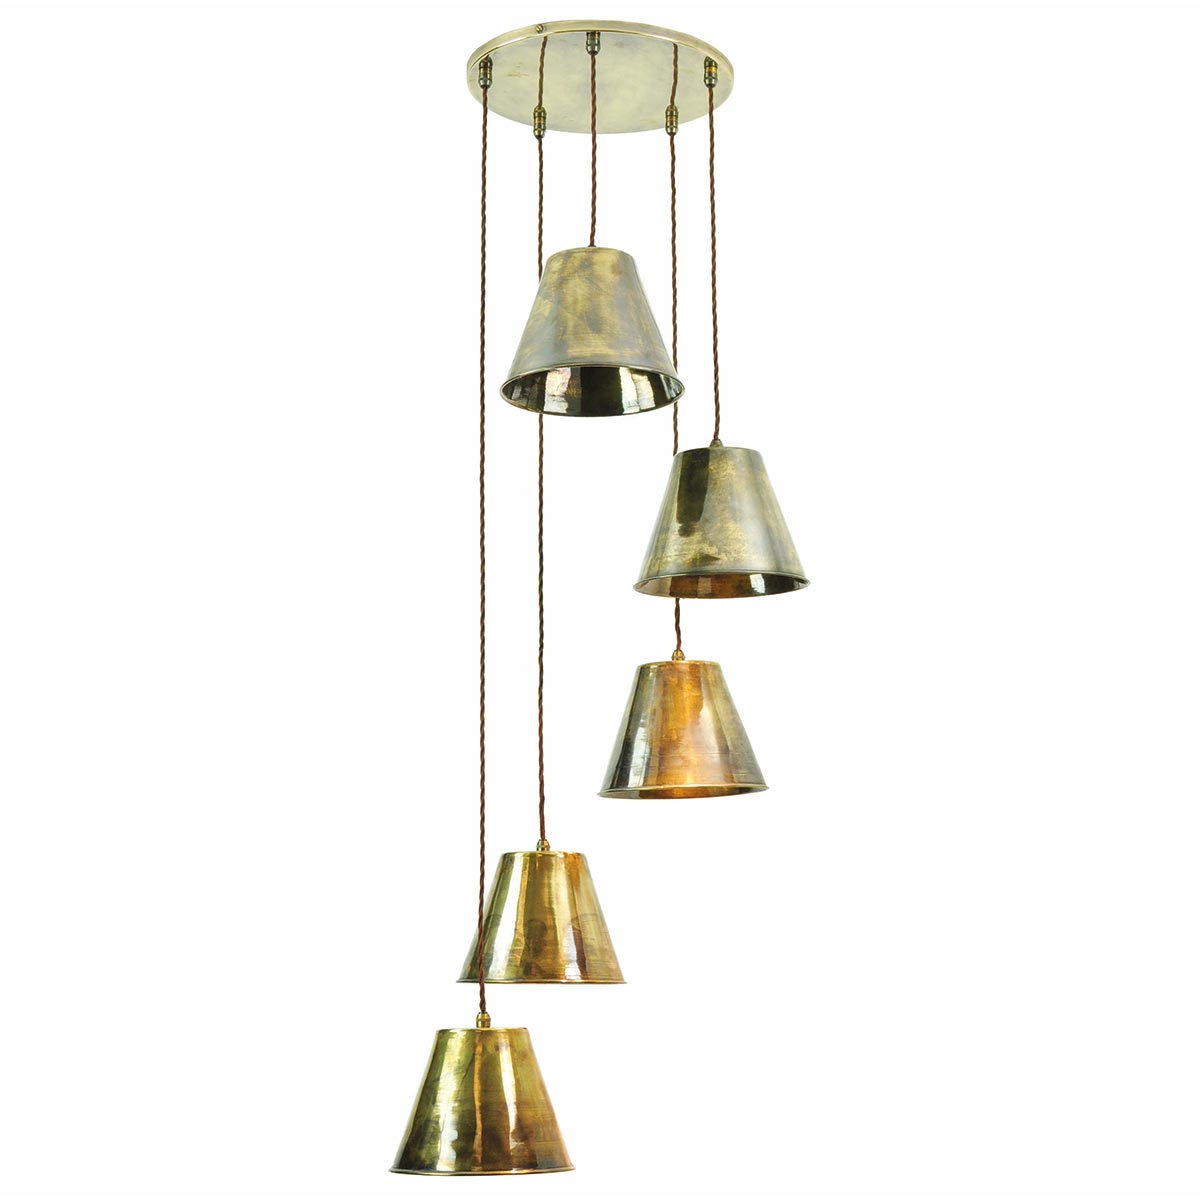 Map Room Nautical 5 Light Cluster Pendant Solid Antique Brass